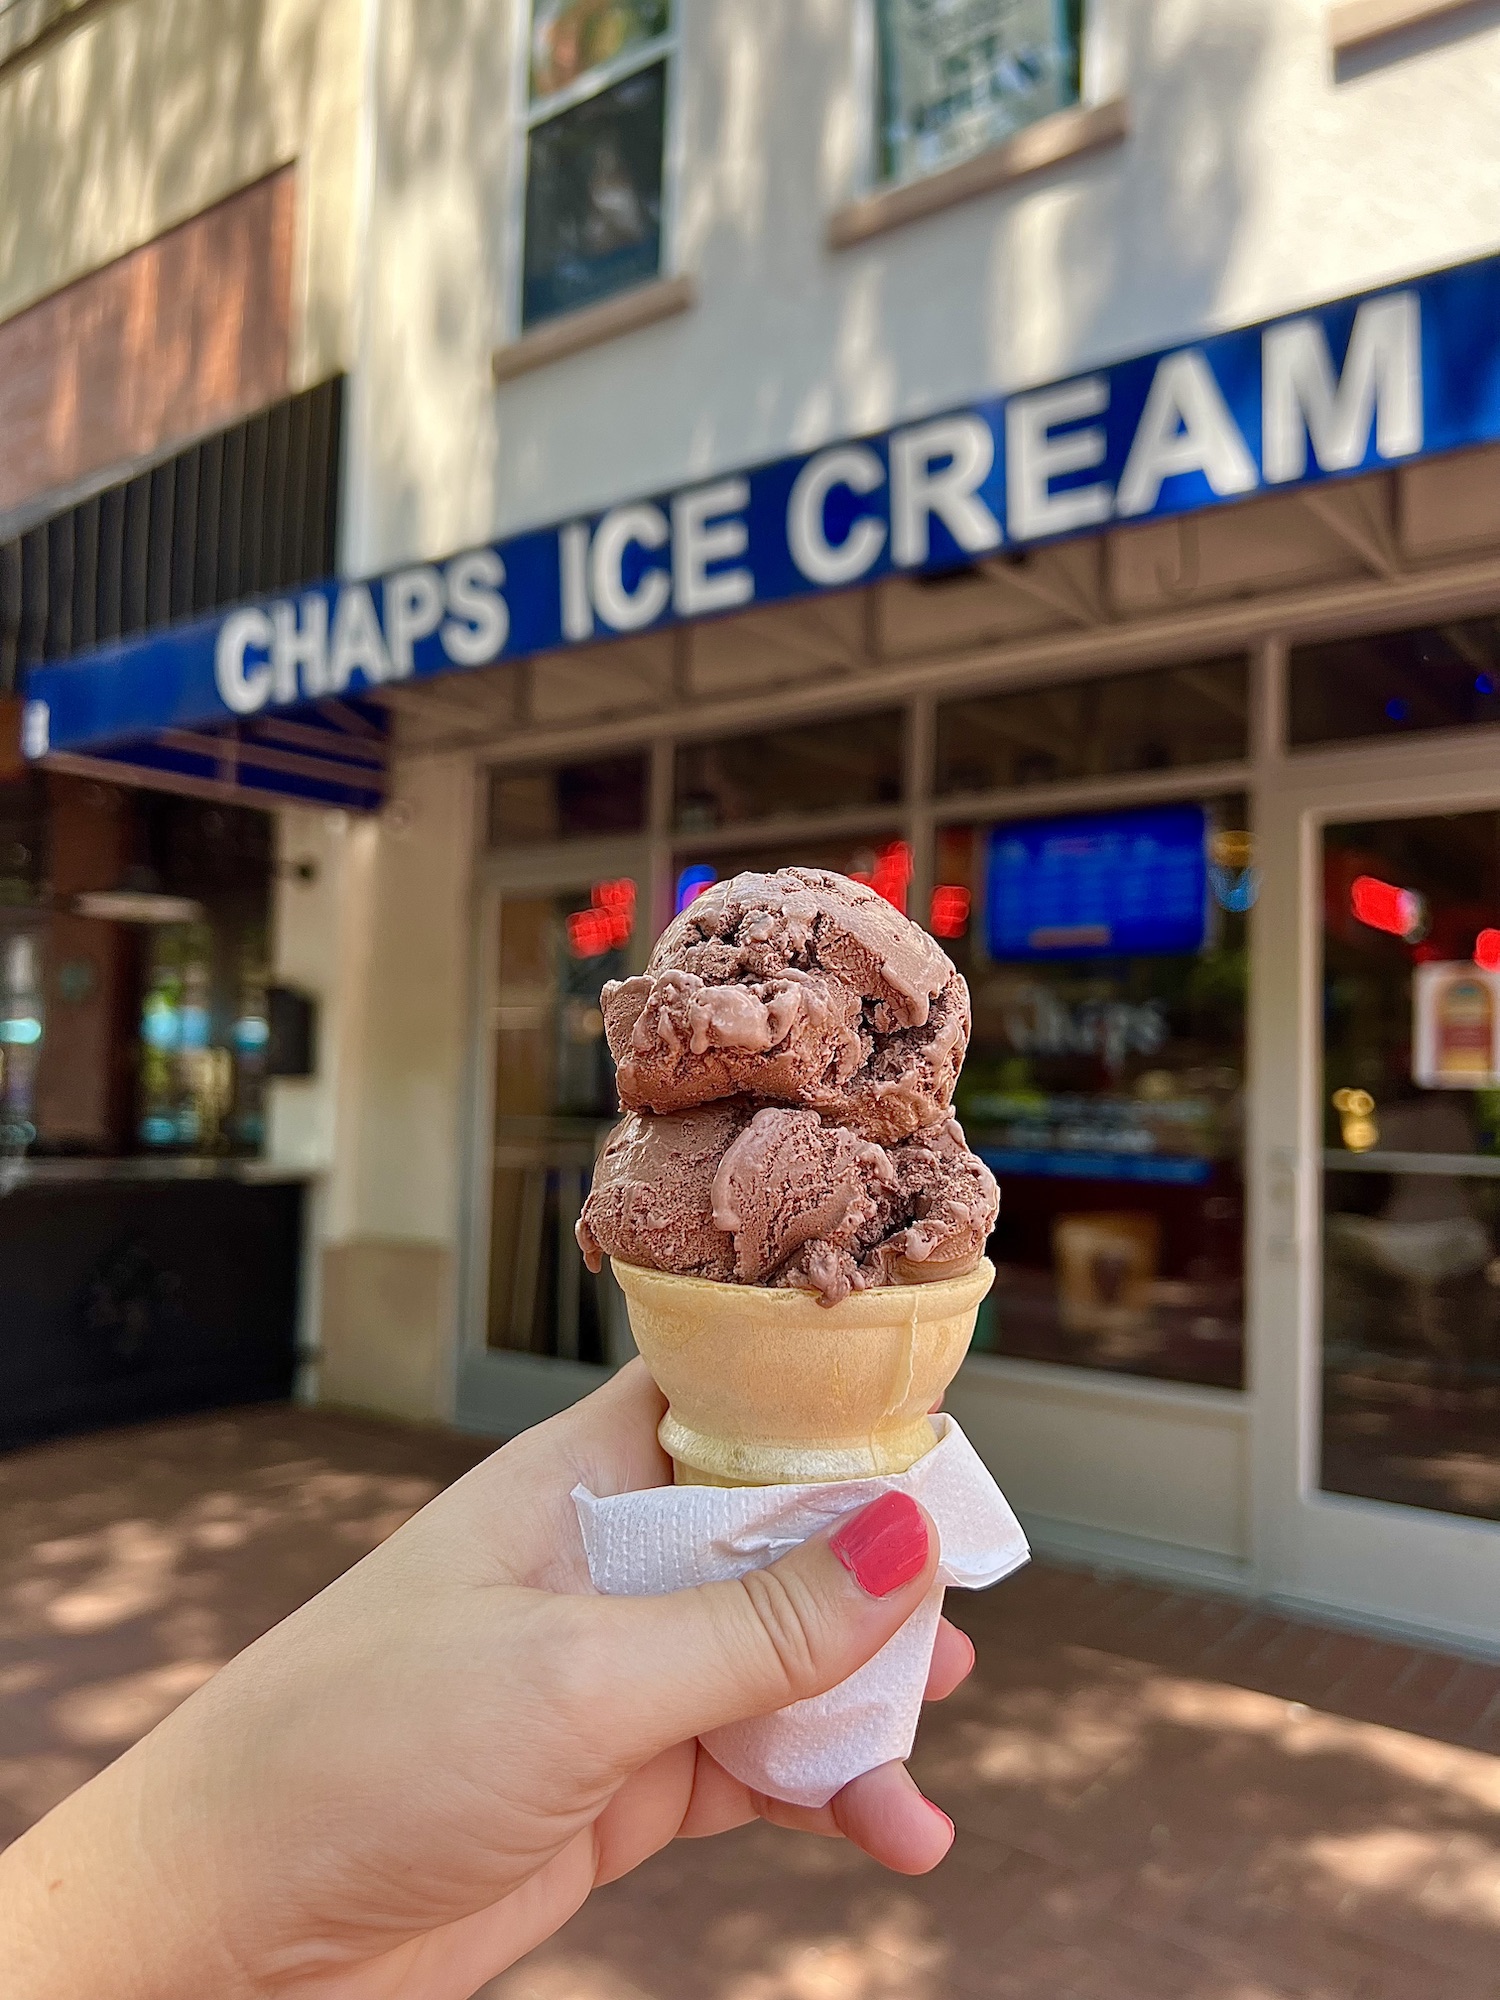 A person holding up a cone of ice cream in front of the chaps ice cream shop.